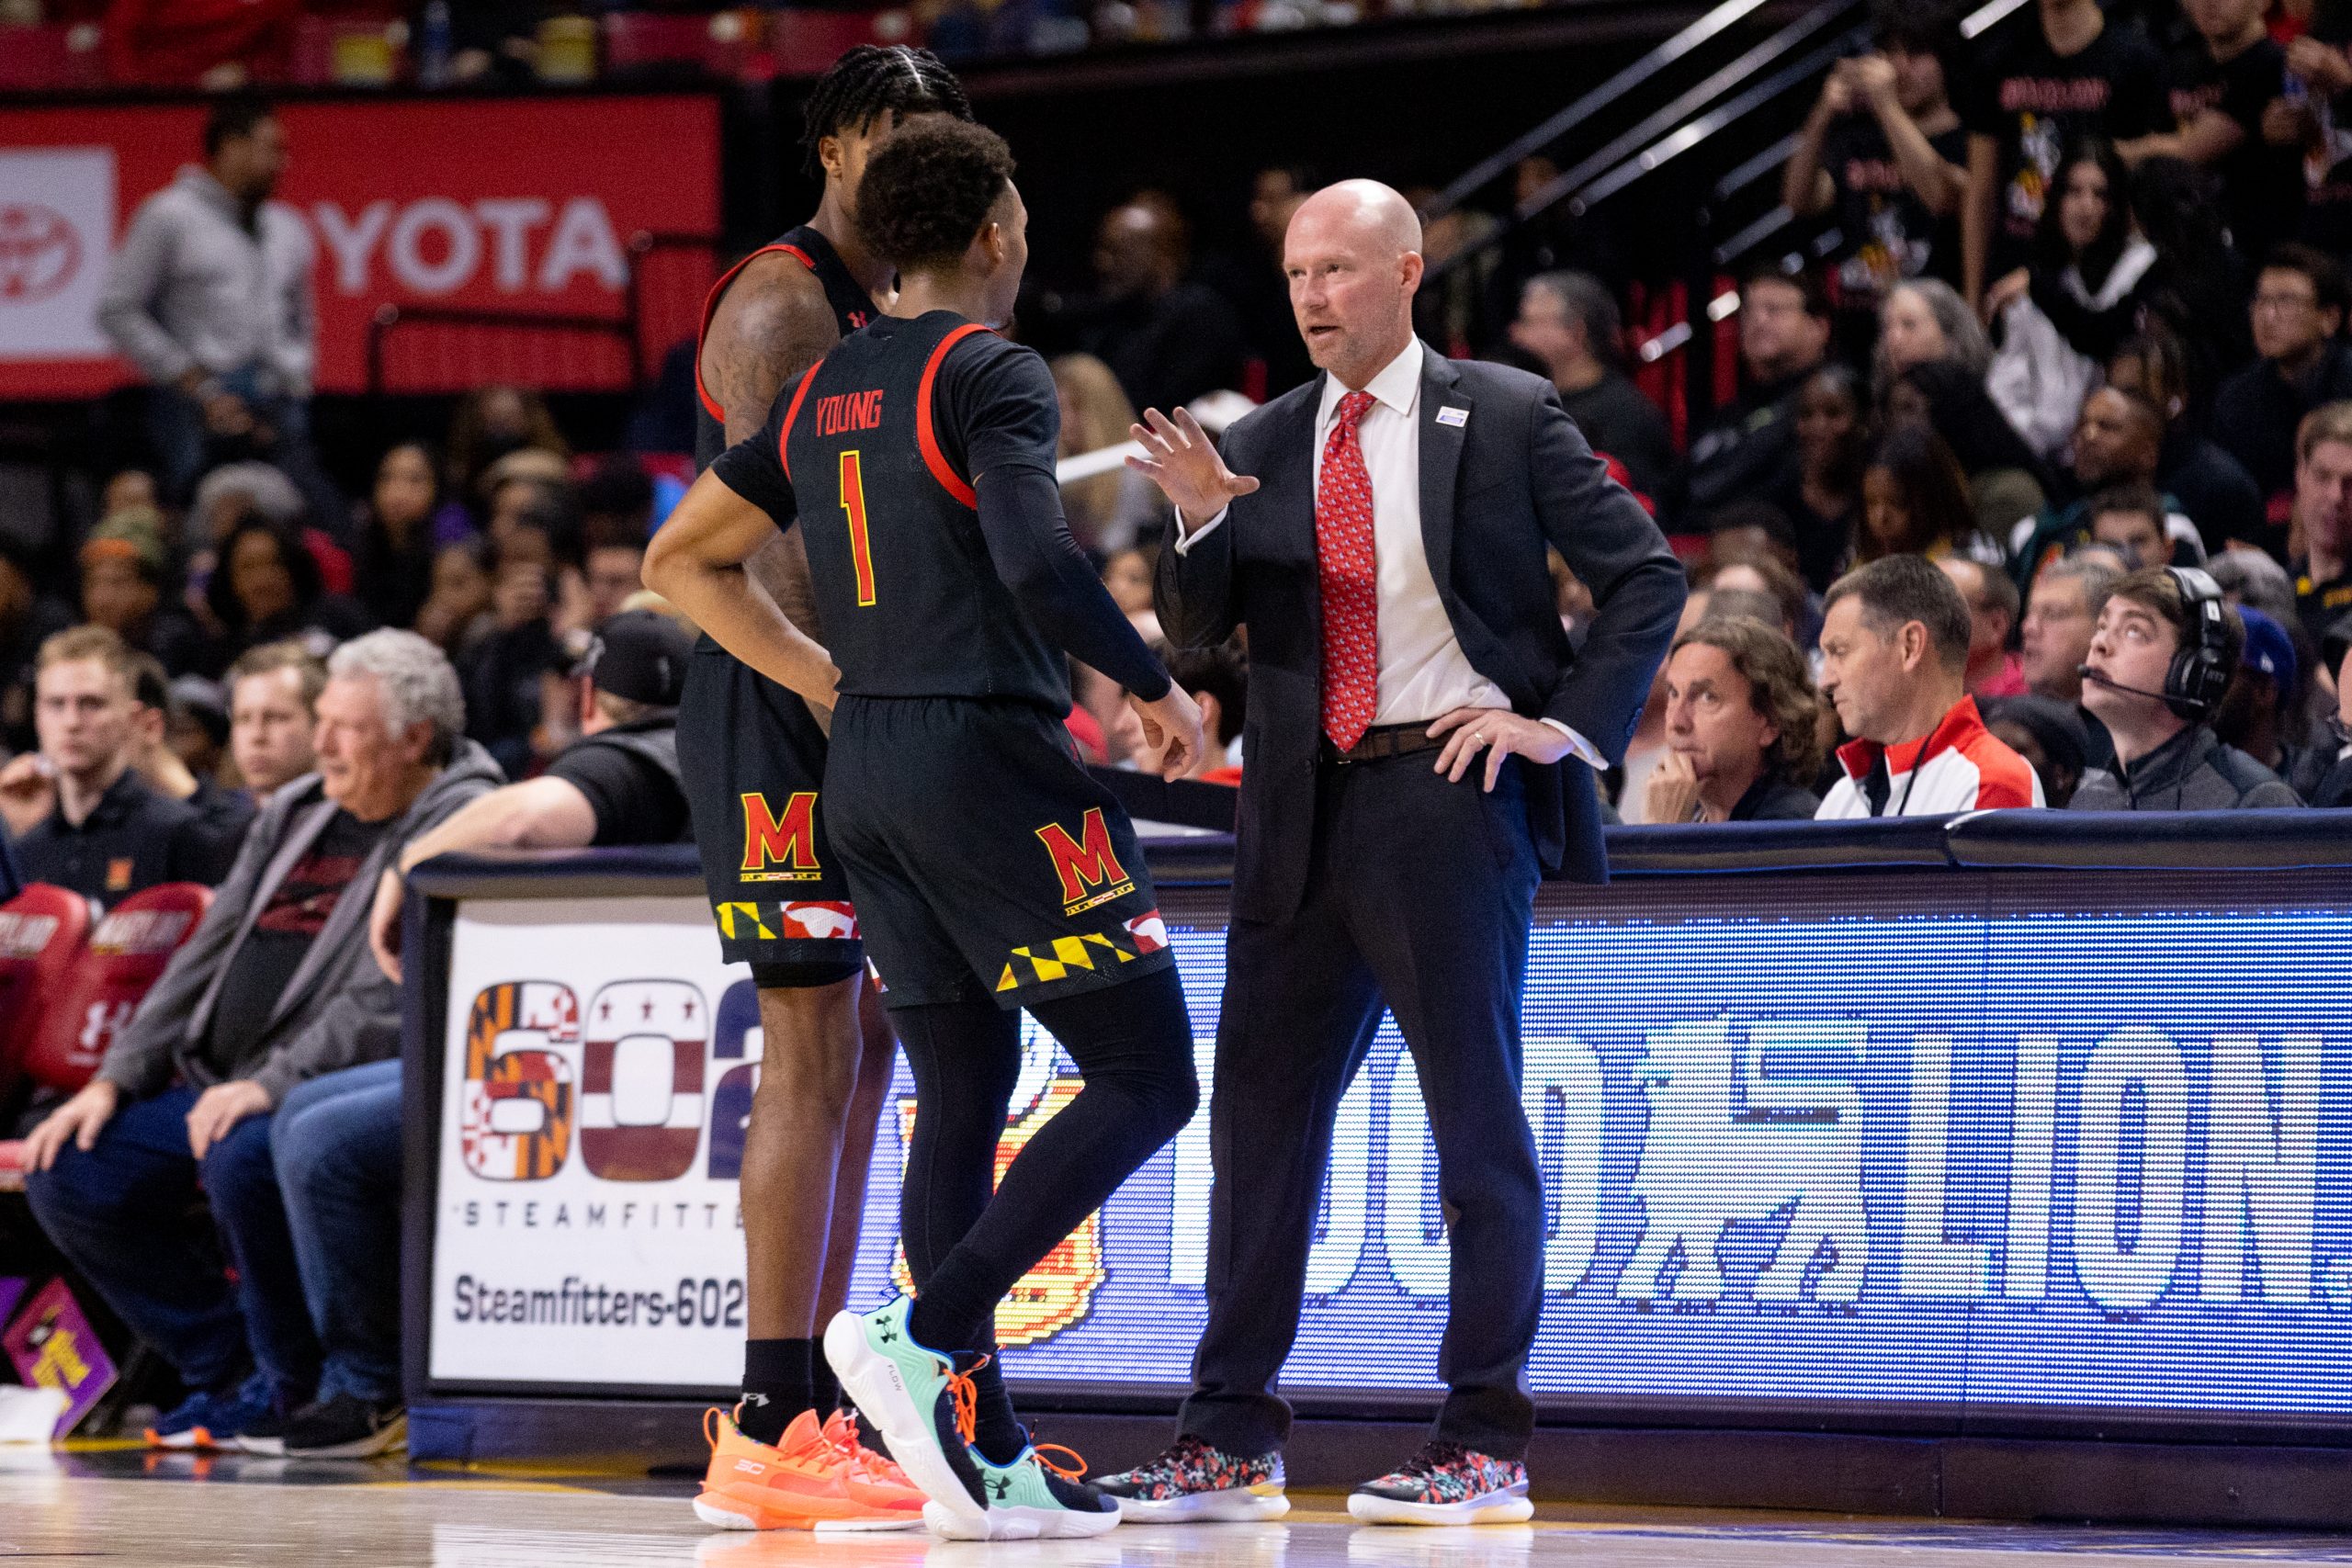 Three takeaways from No. 22 Maryland men's basketball's blowout